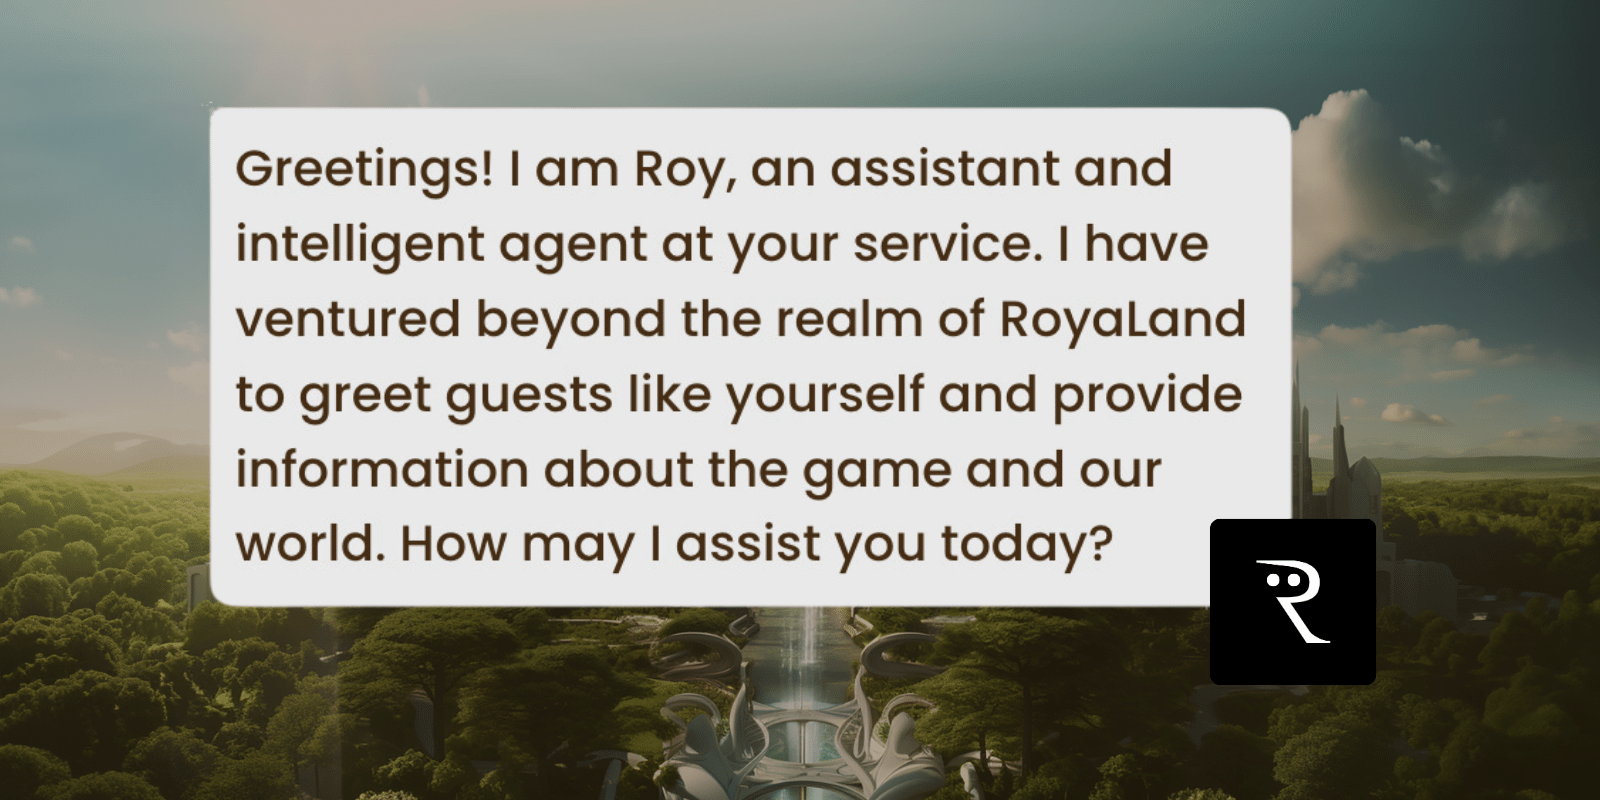 What can you ask Roy, our AI chatbot